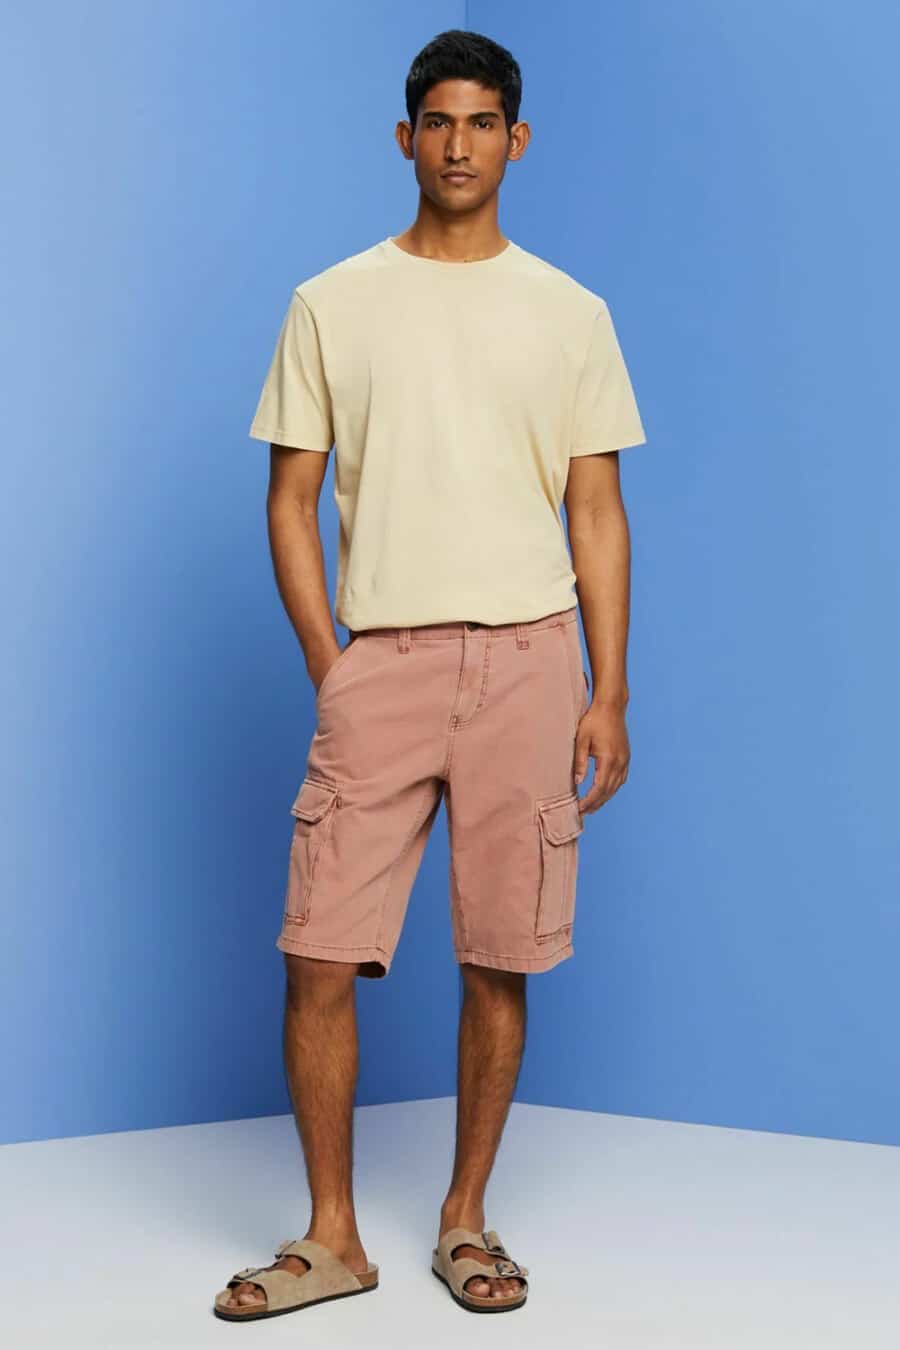 Men's pink cargo shorts, beige T-shirt, taupe suede slider sandals outfit